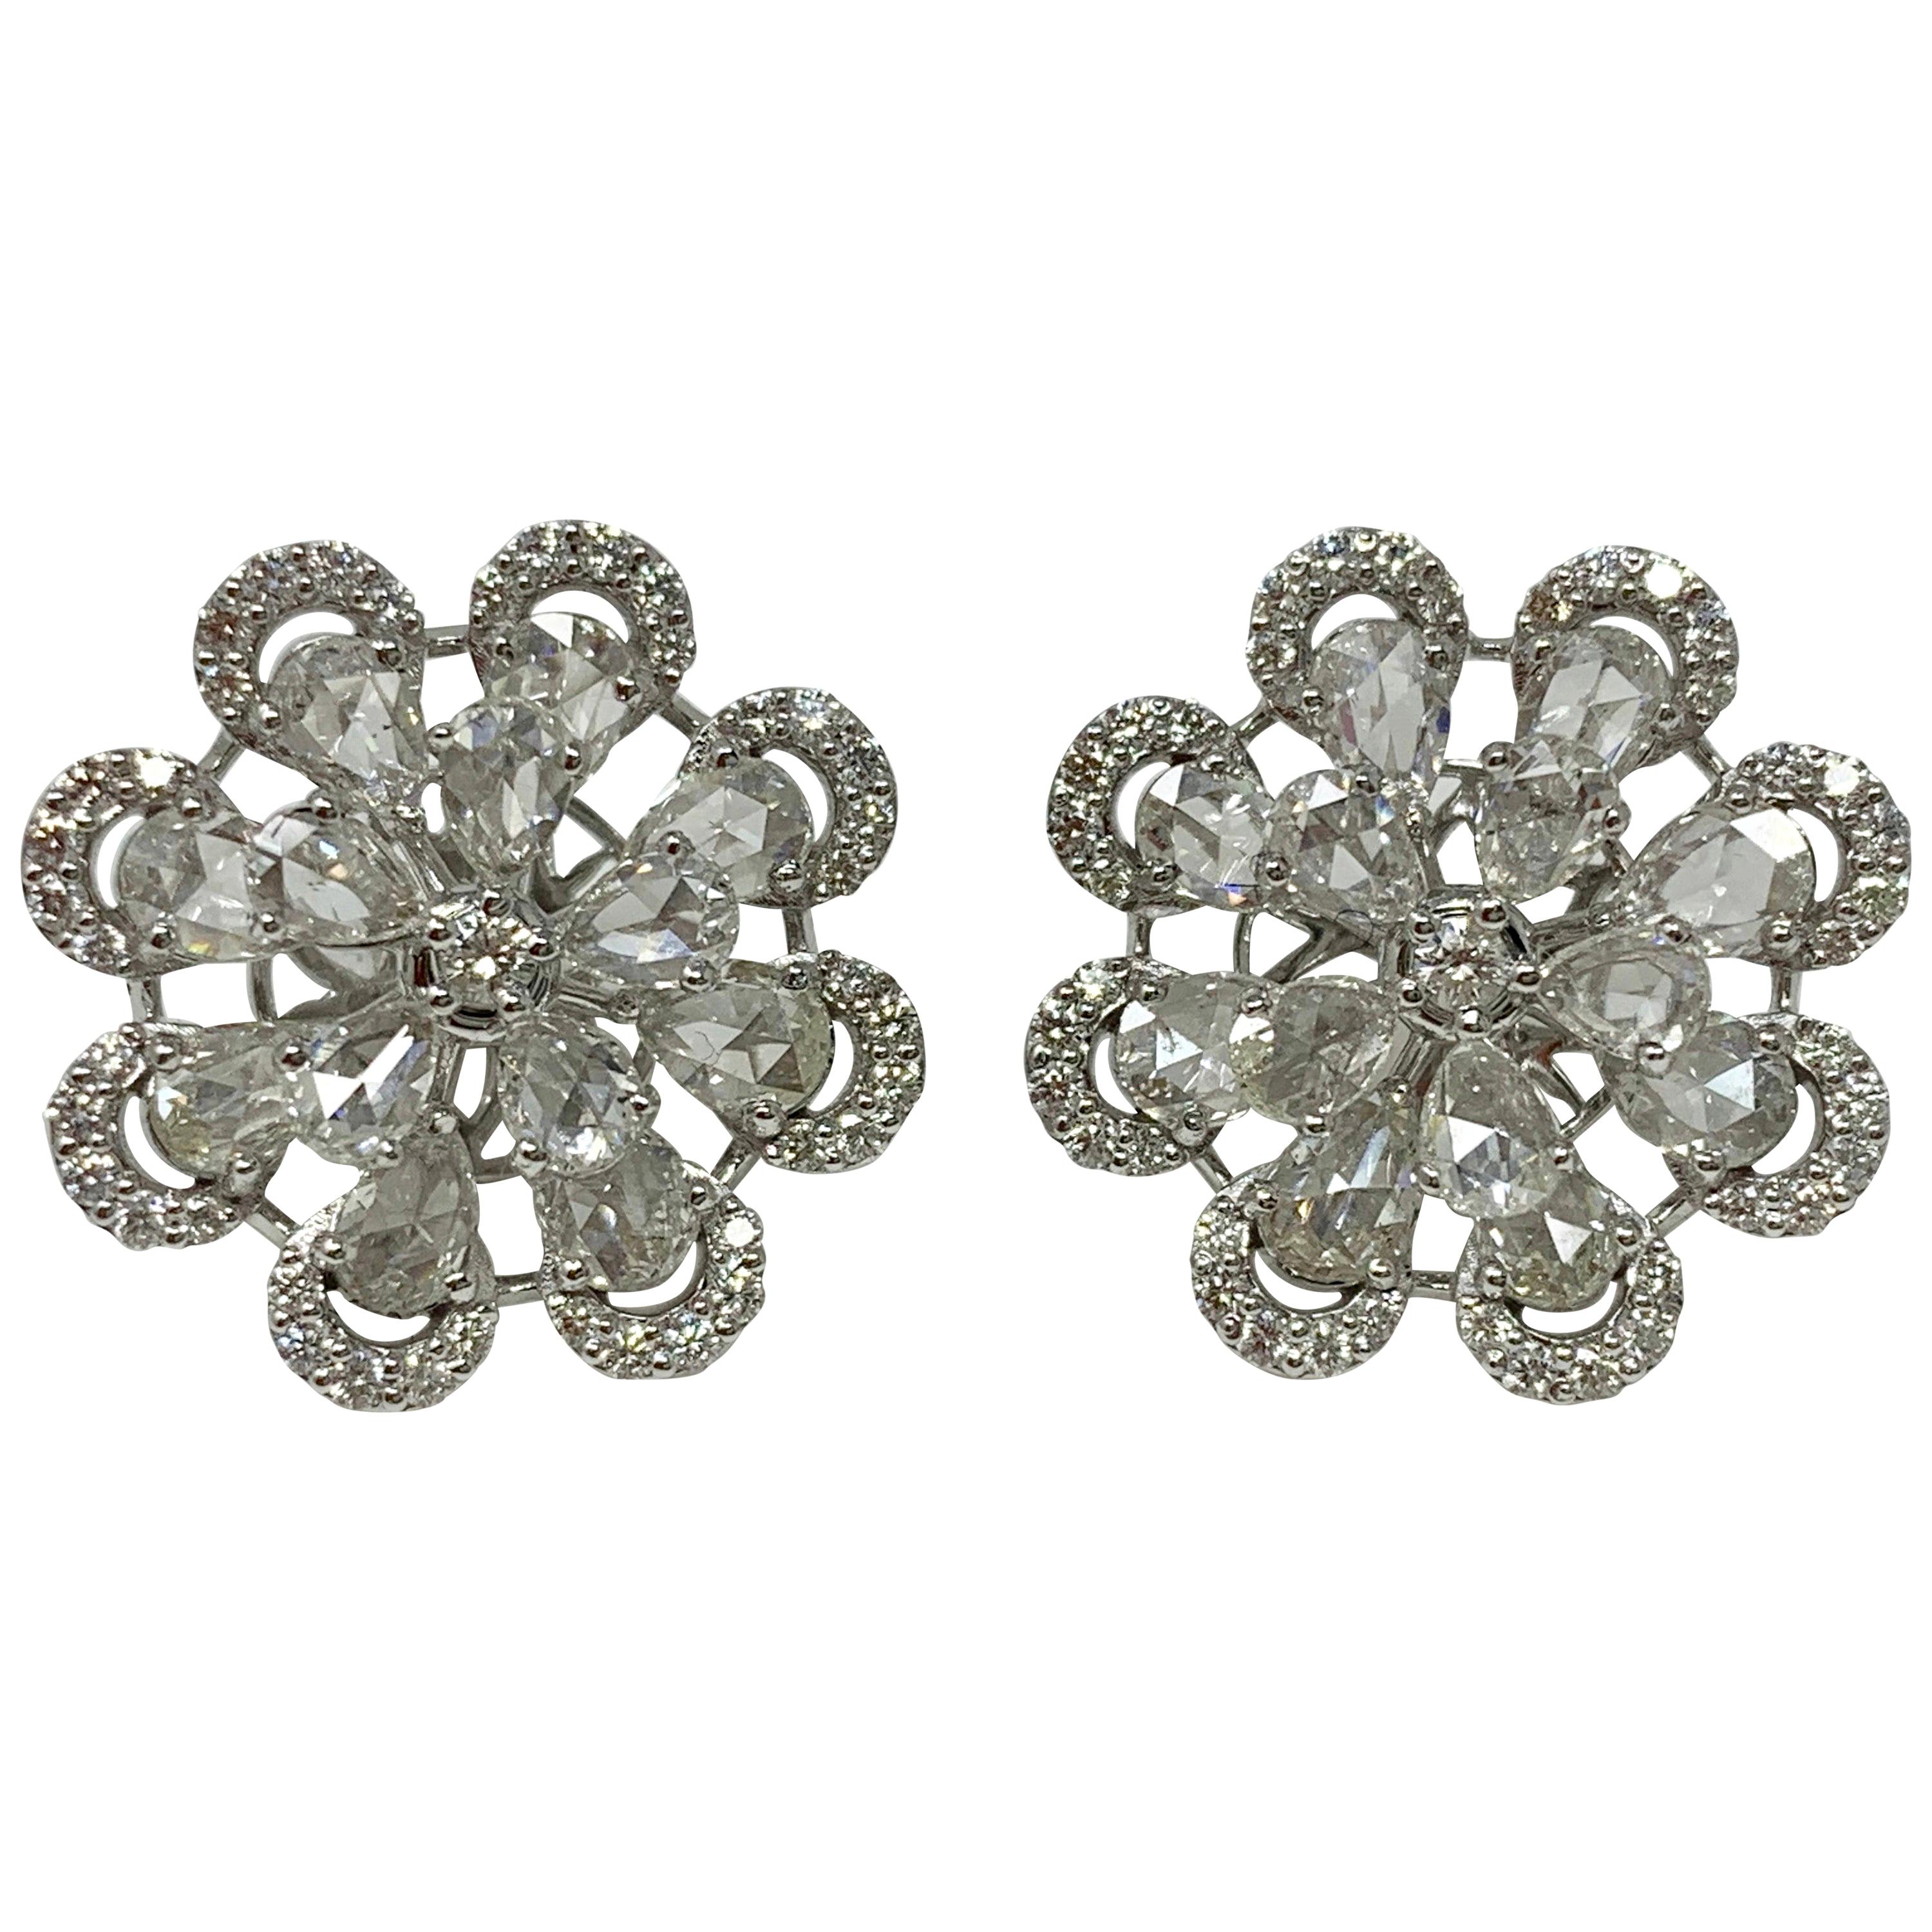 Moguldiam Inc Rose Cut Diamond Stud Earrings beautifully handmade in 18 K white gold. 
Diamond weight: 3.60 carats ( GH color and VS clarity ) 
Metal: 18 K White Gold 
video is available upon request. 
